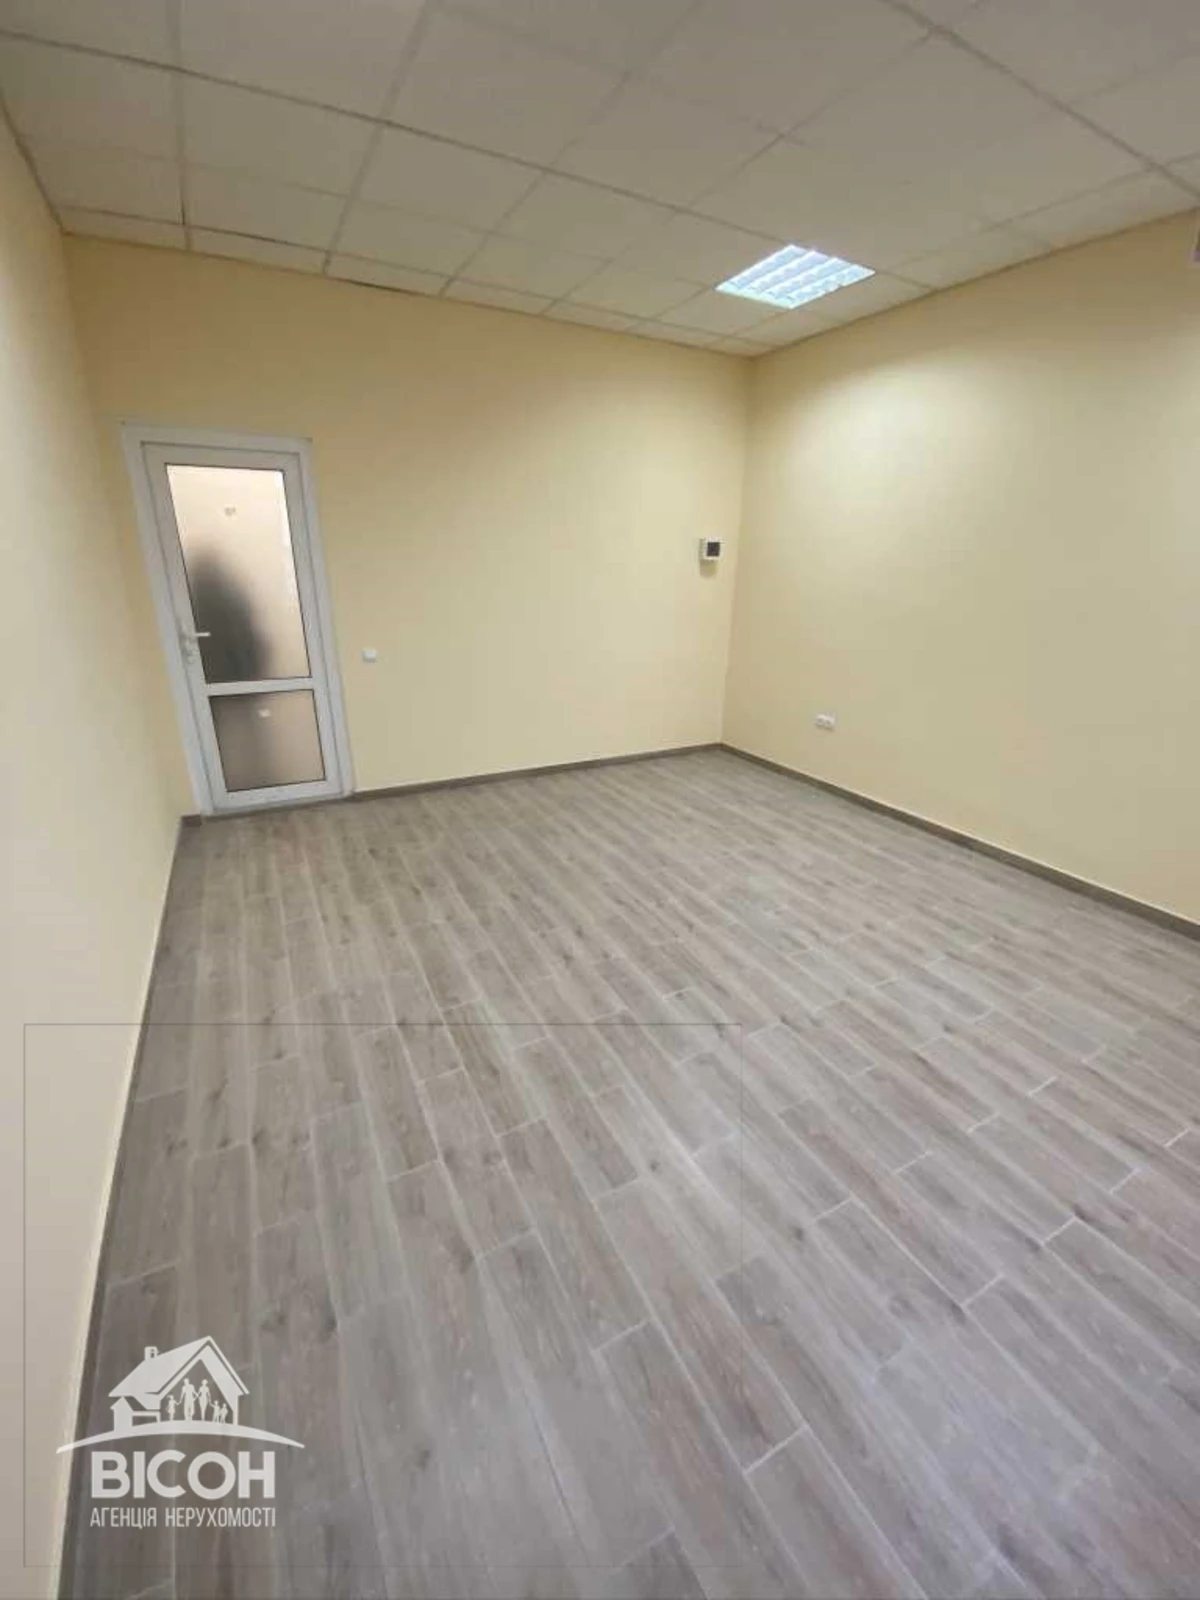 Real estate for sale for commercial purposes. 19 m², 9th floor/10 floors. Tsentr, Ternopil. 